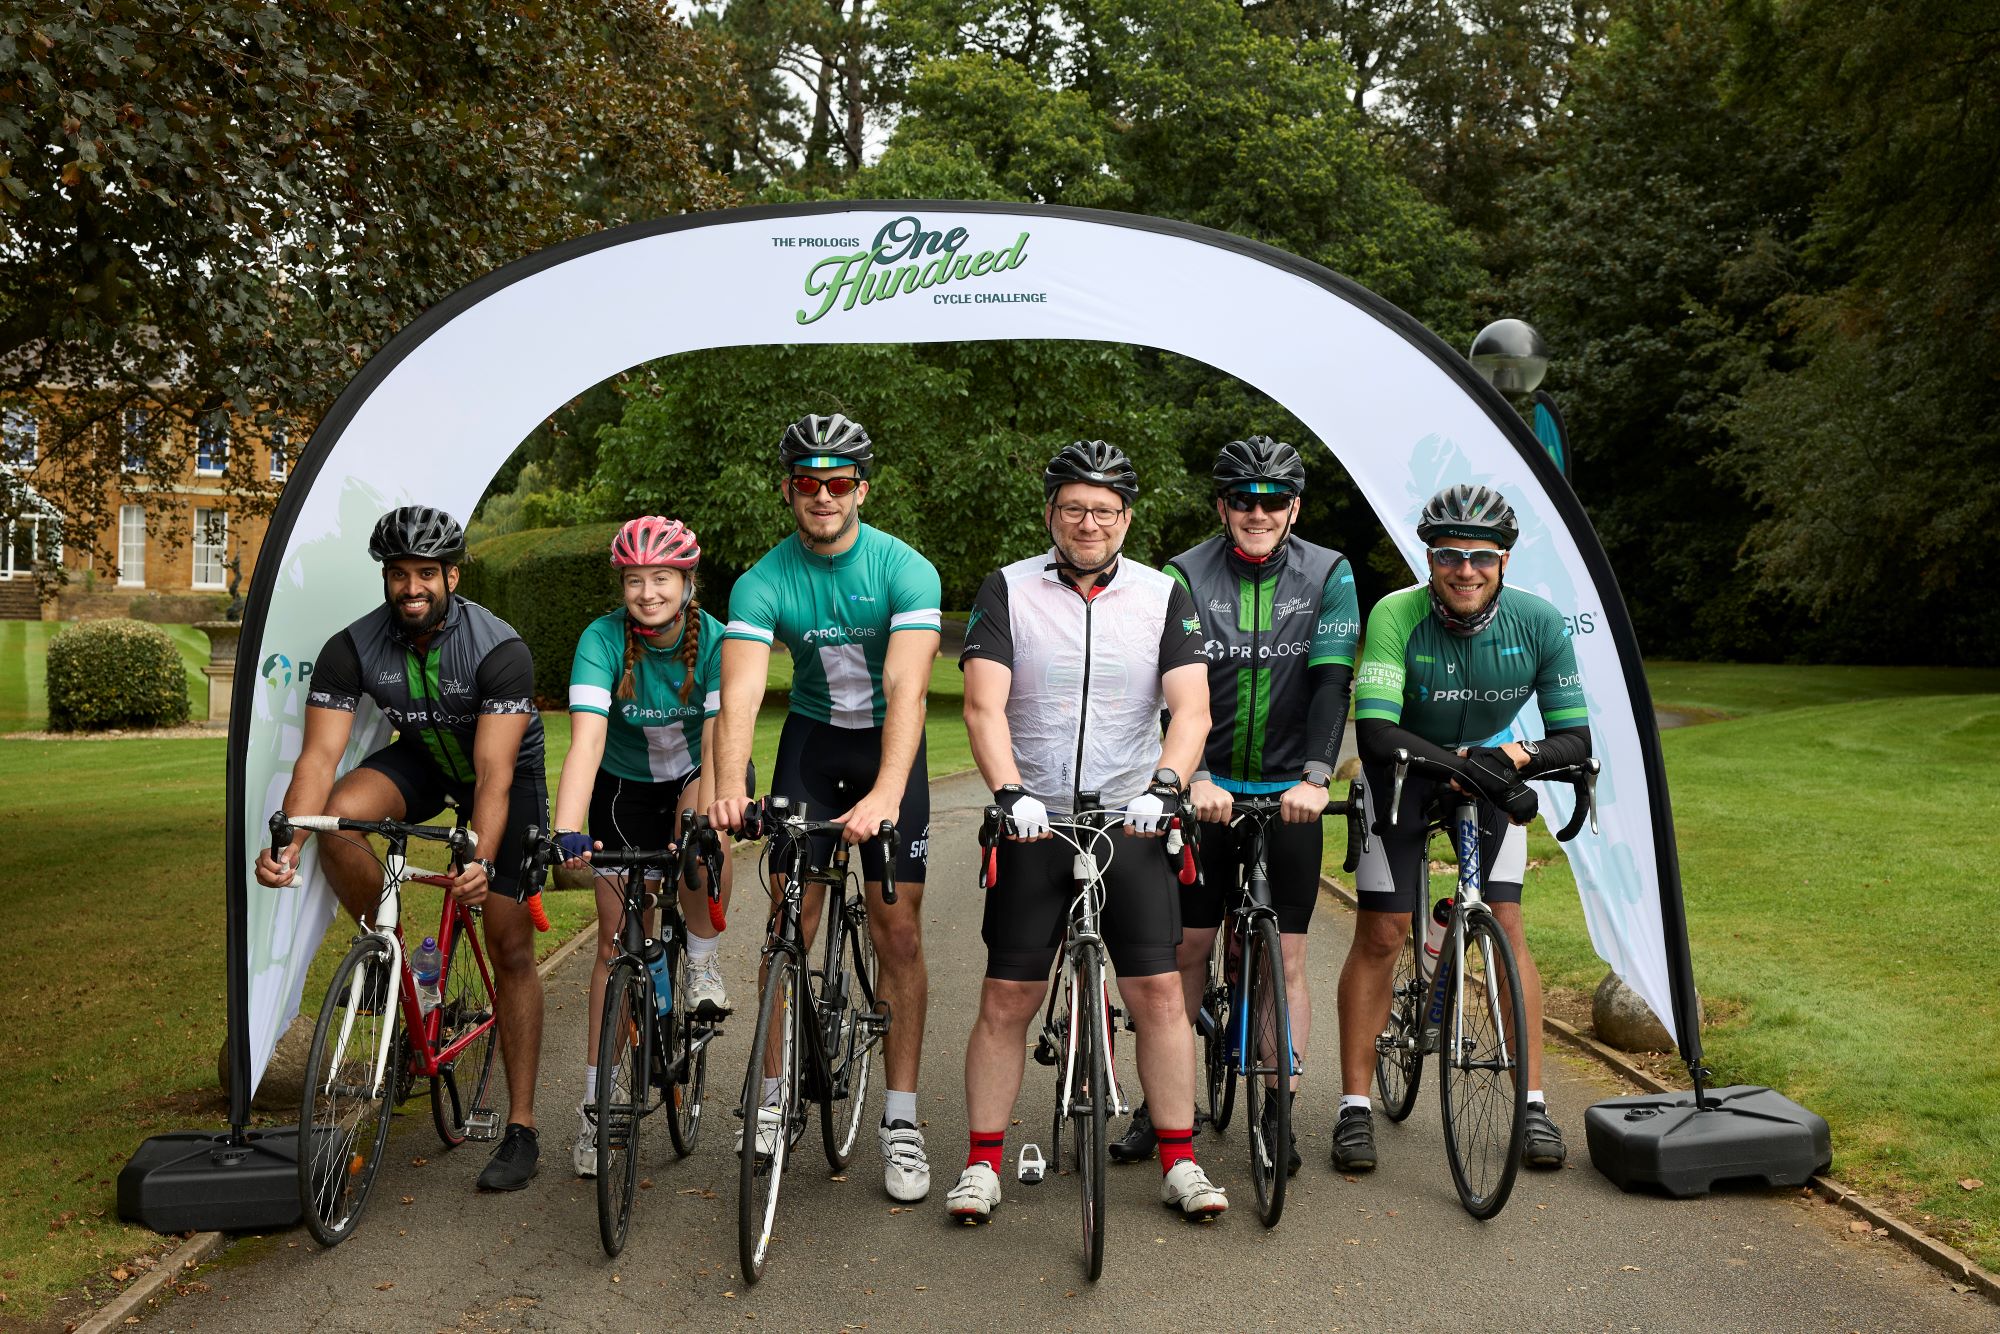 Prologis 100 charity ride